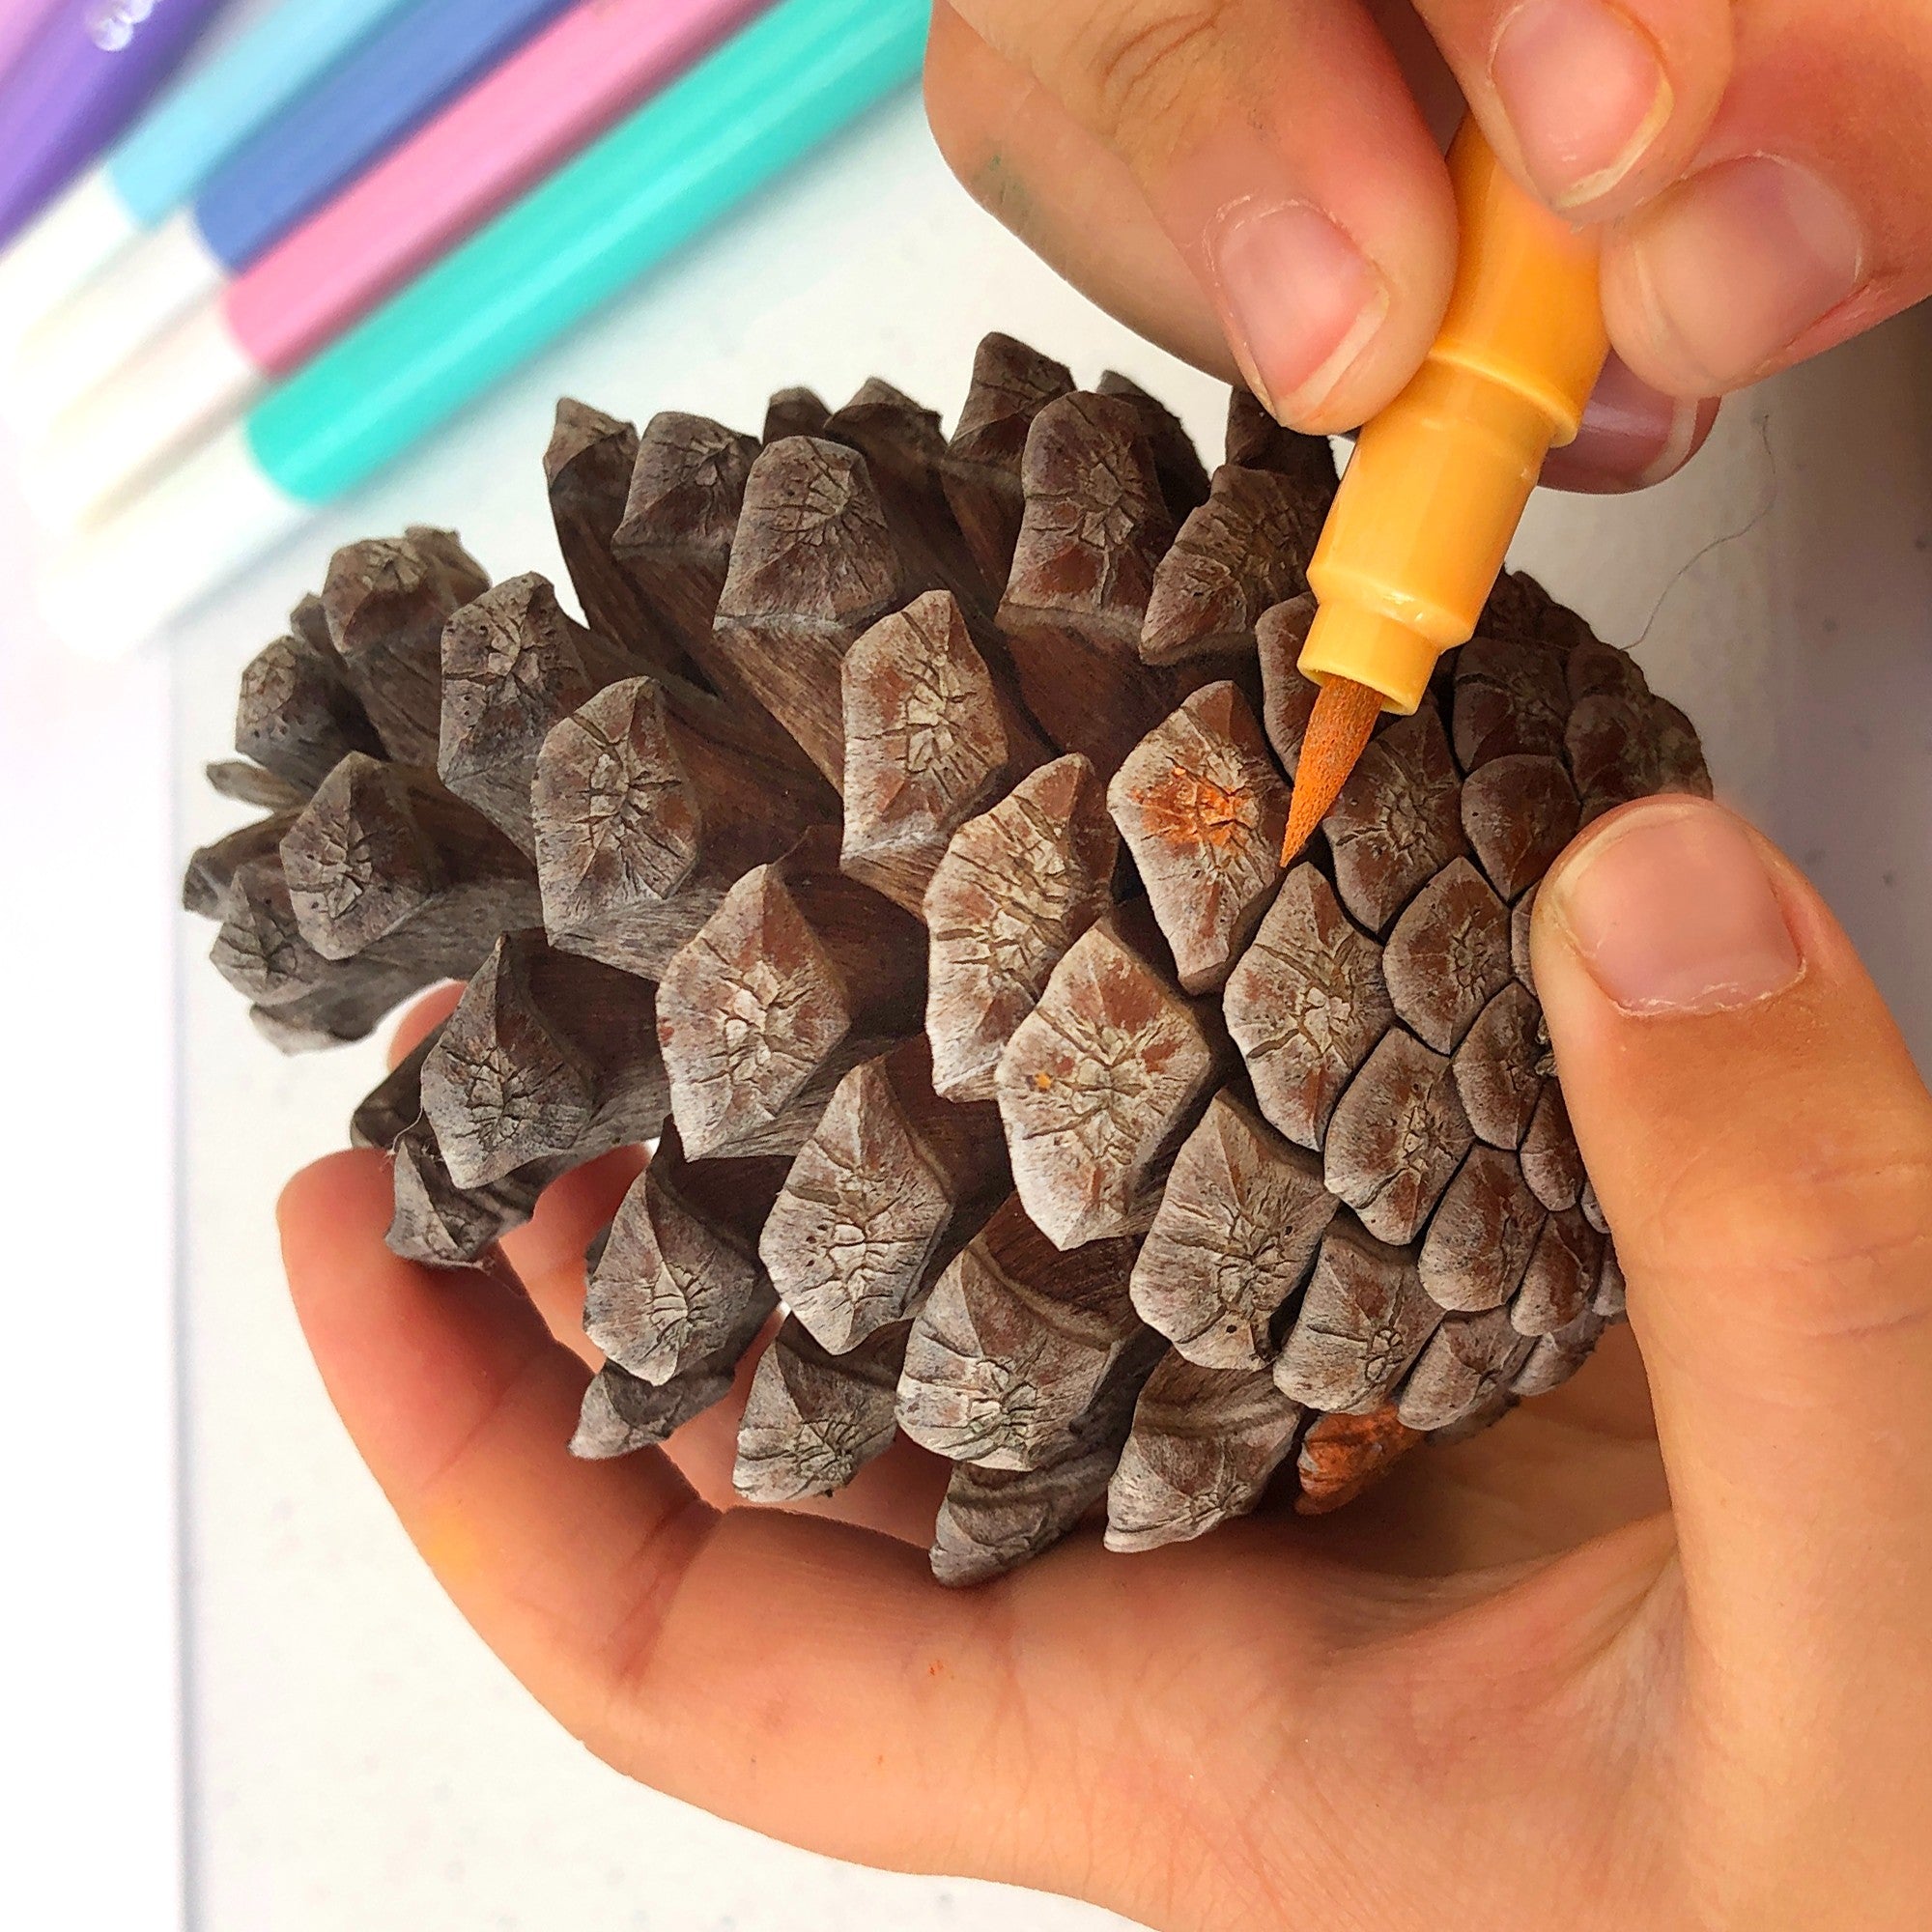 Hand holding pinecone while other hand colors using marker and markers in the background